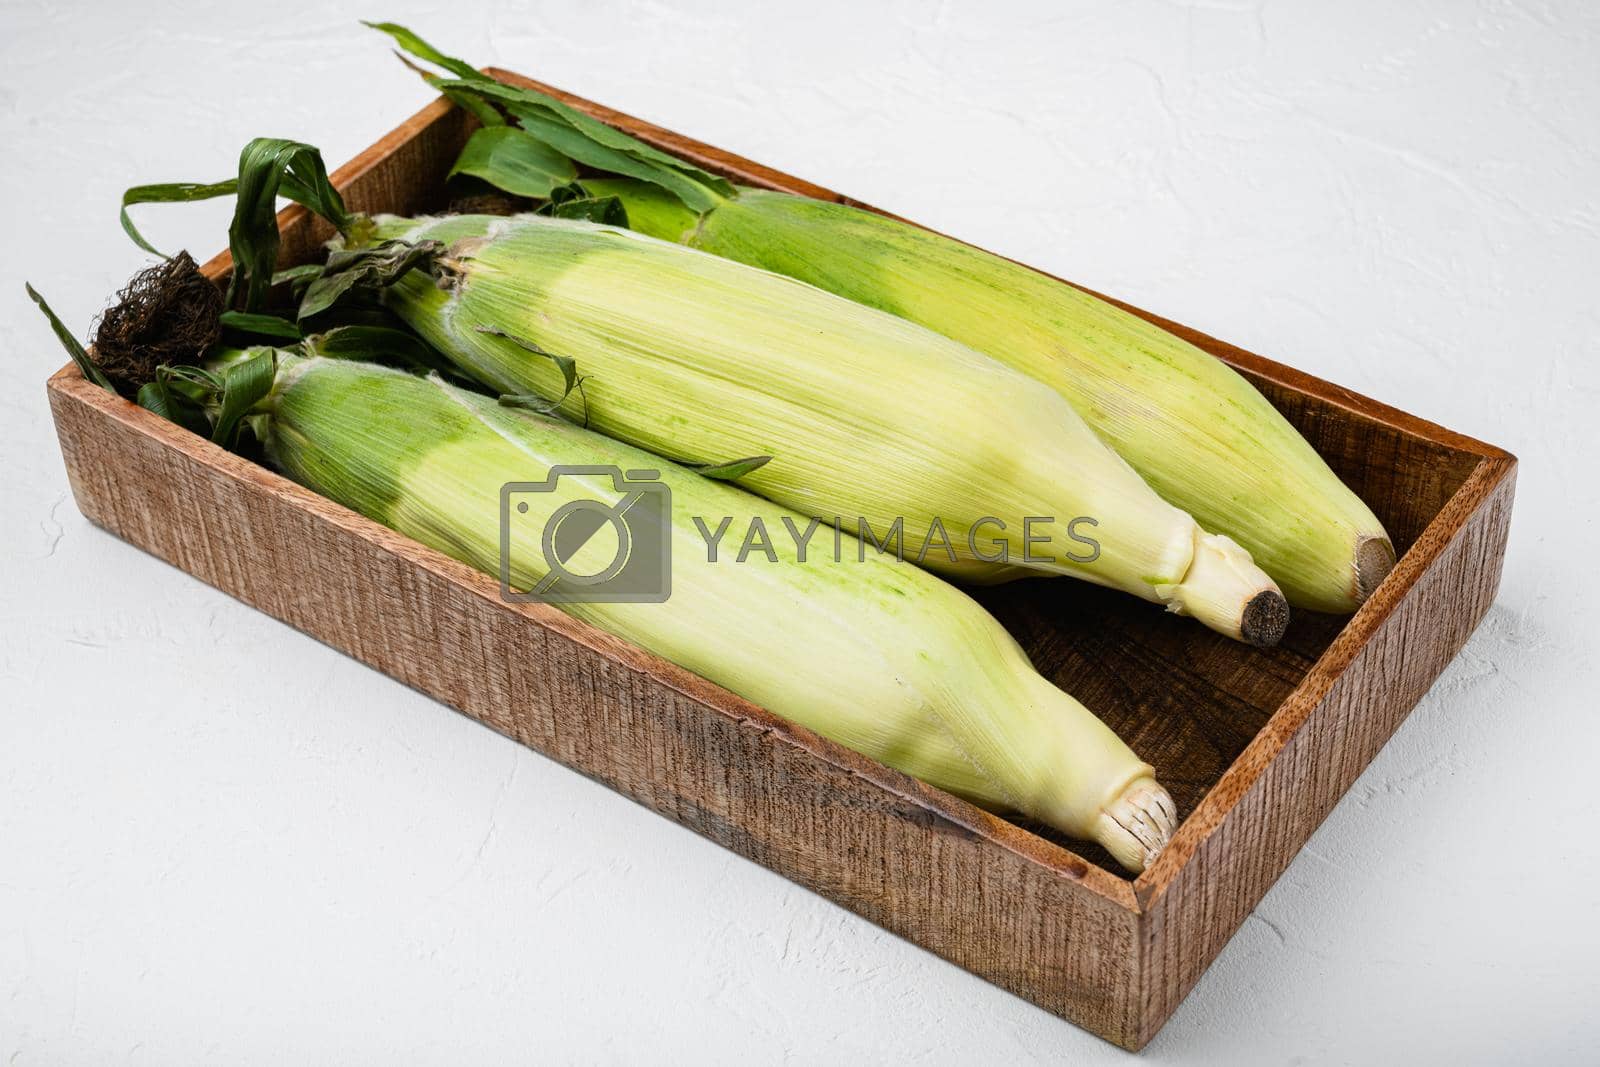 Royalty free image of Ear of maize or corn, on white stone table background by Ilianesolenyi